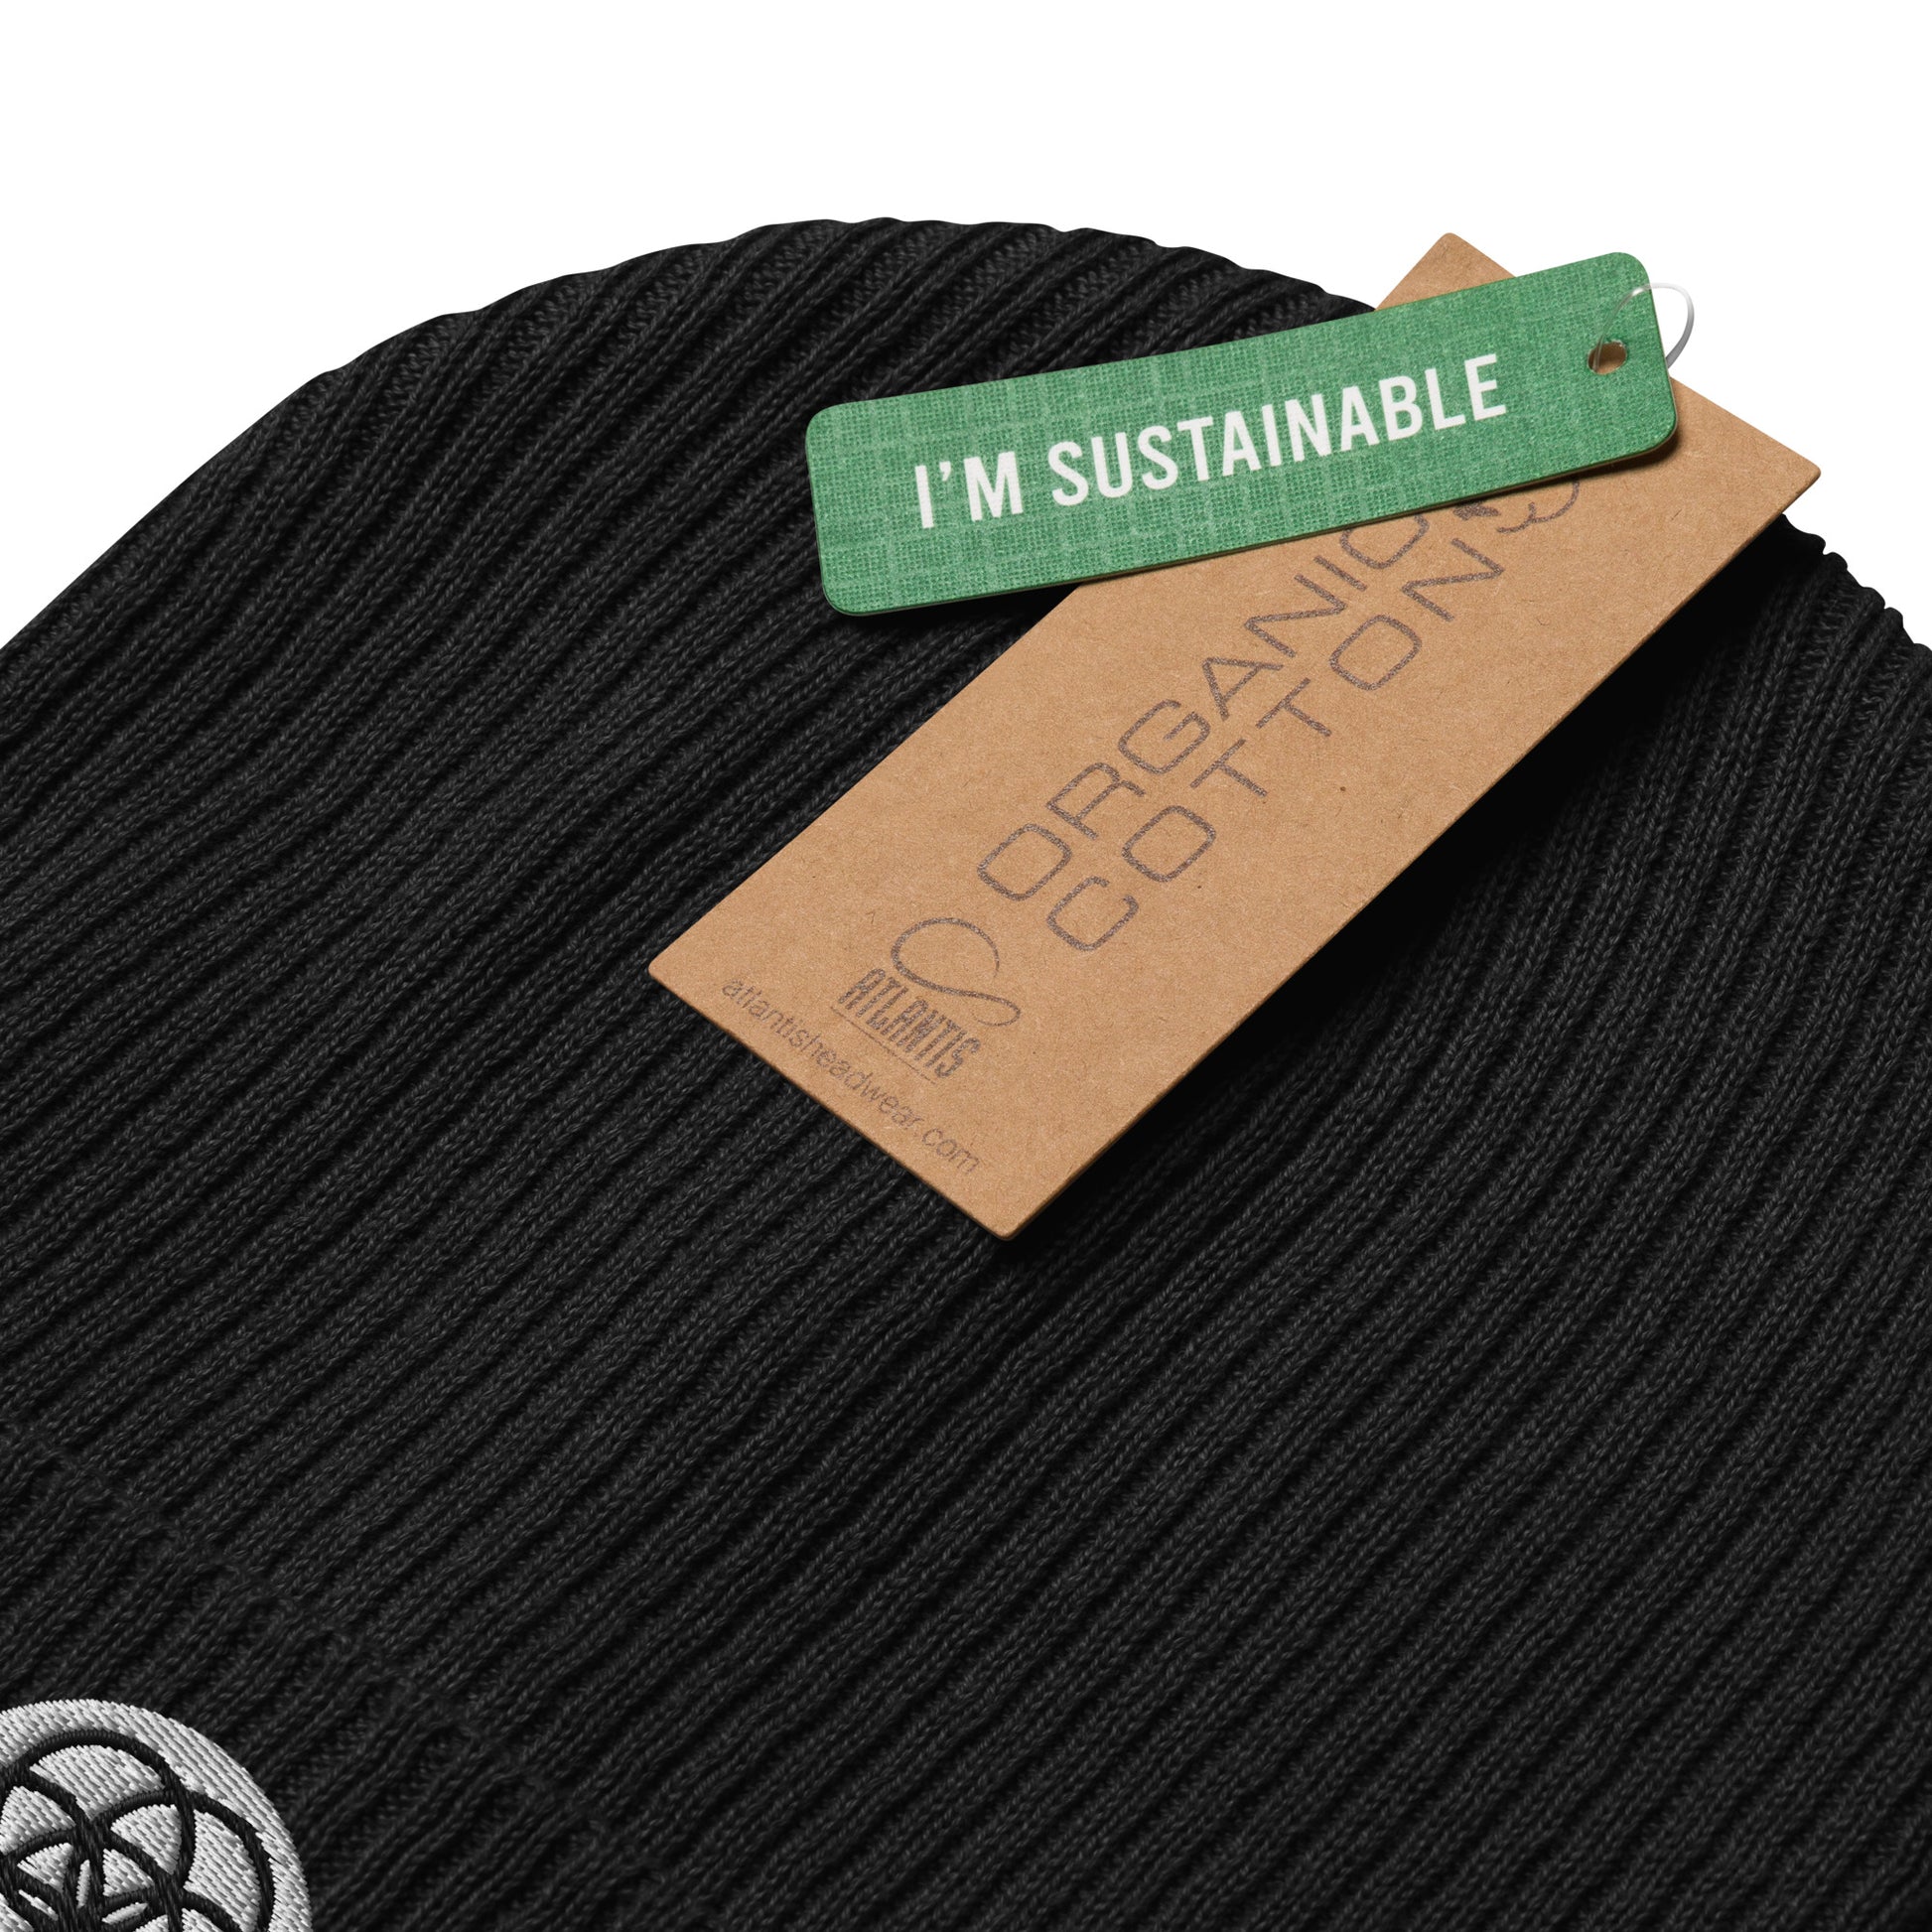  The Seed of Life beanie in Midnight Black is made from 100% organic cotton and it’s the perfect cozy addition to your energetically elevated wardrobe. The seed of life is an ancient and meaningful sacred geometry symbol that Whether you're stargazing or navigating the urban jungle, let this beanie remind you of your place in the cosmic tapestry. with a label of I'M Sustainable